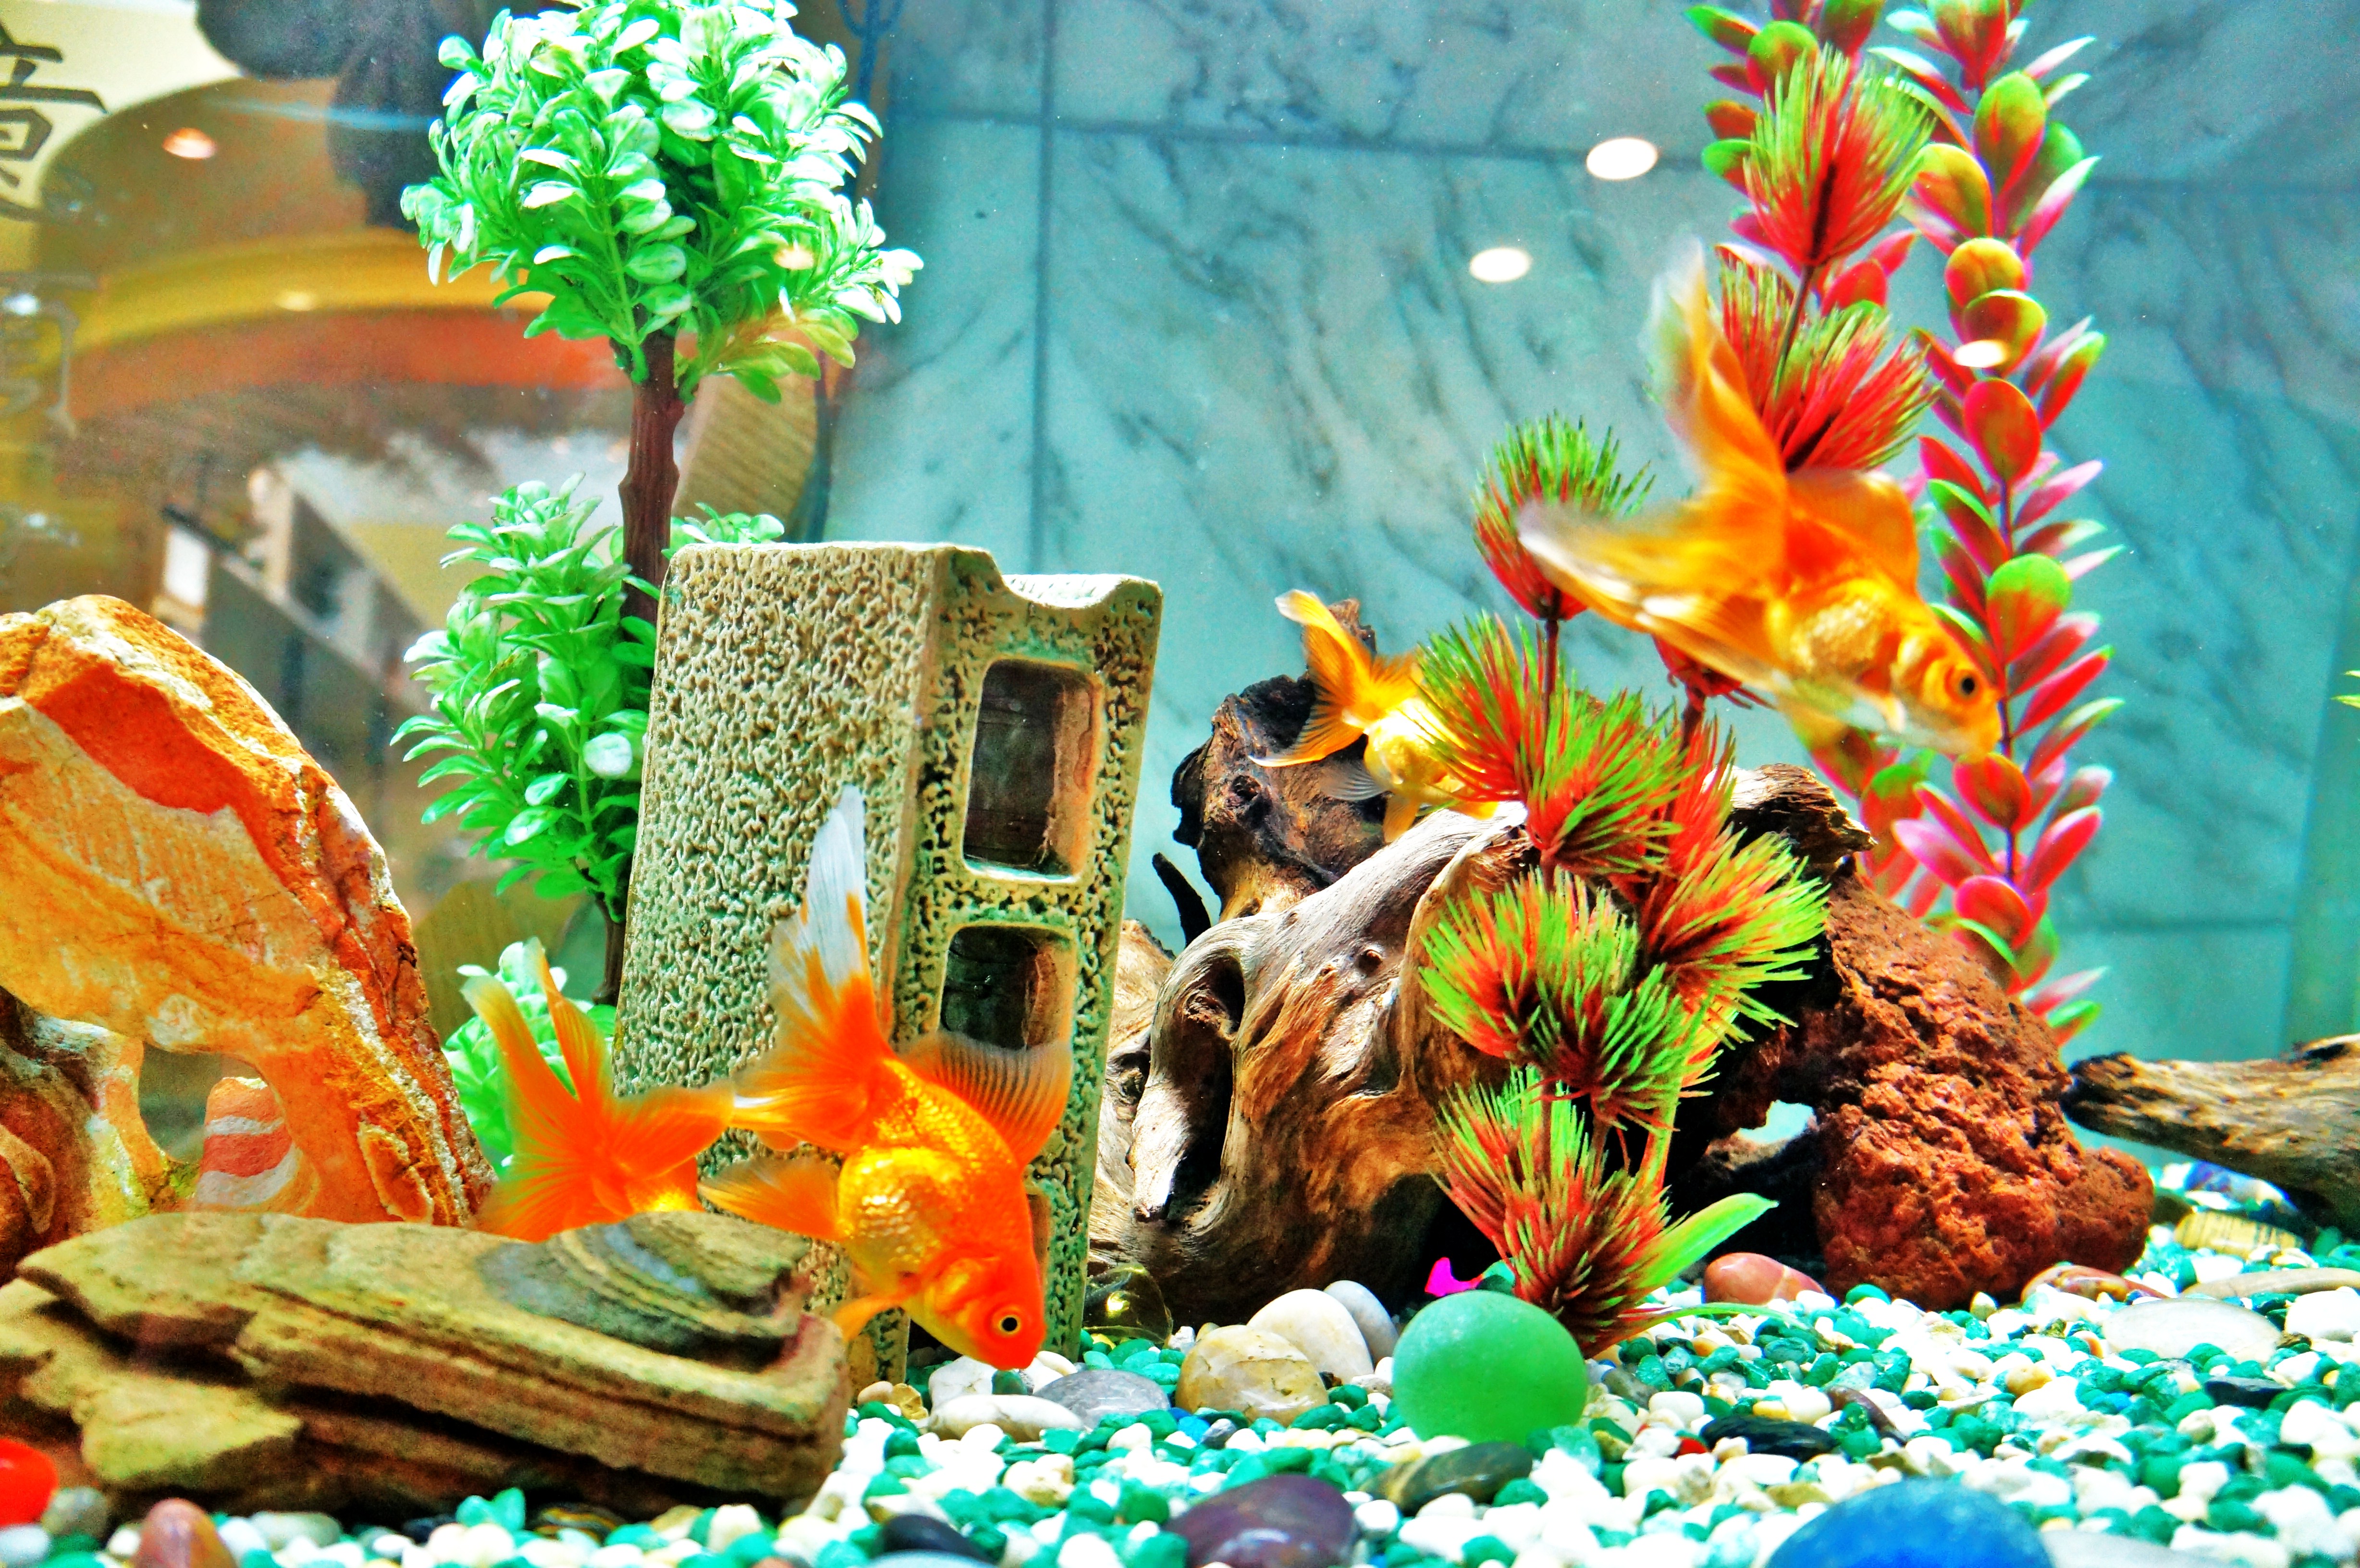 File:Golden fish in a tank - panoramio.jpg - Wikimedia Commons